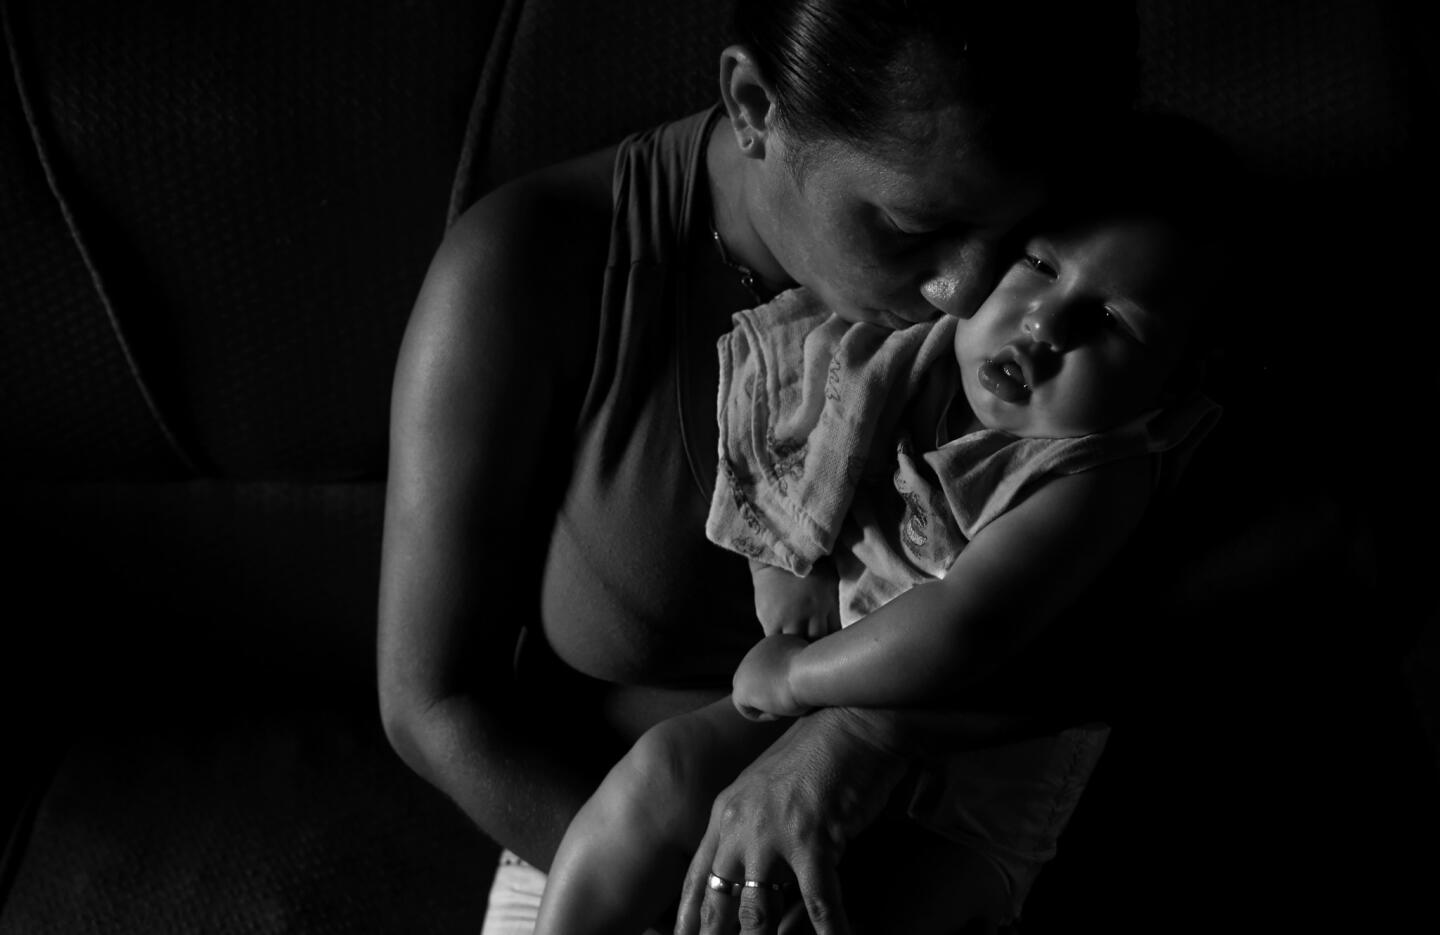 Josemary Gomes cradles her 4-month-old son, Gilberto, in March. "I am Gilberto's father now," she says.